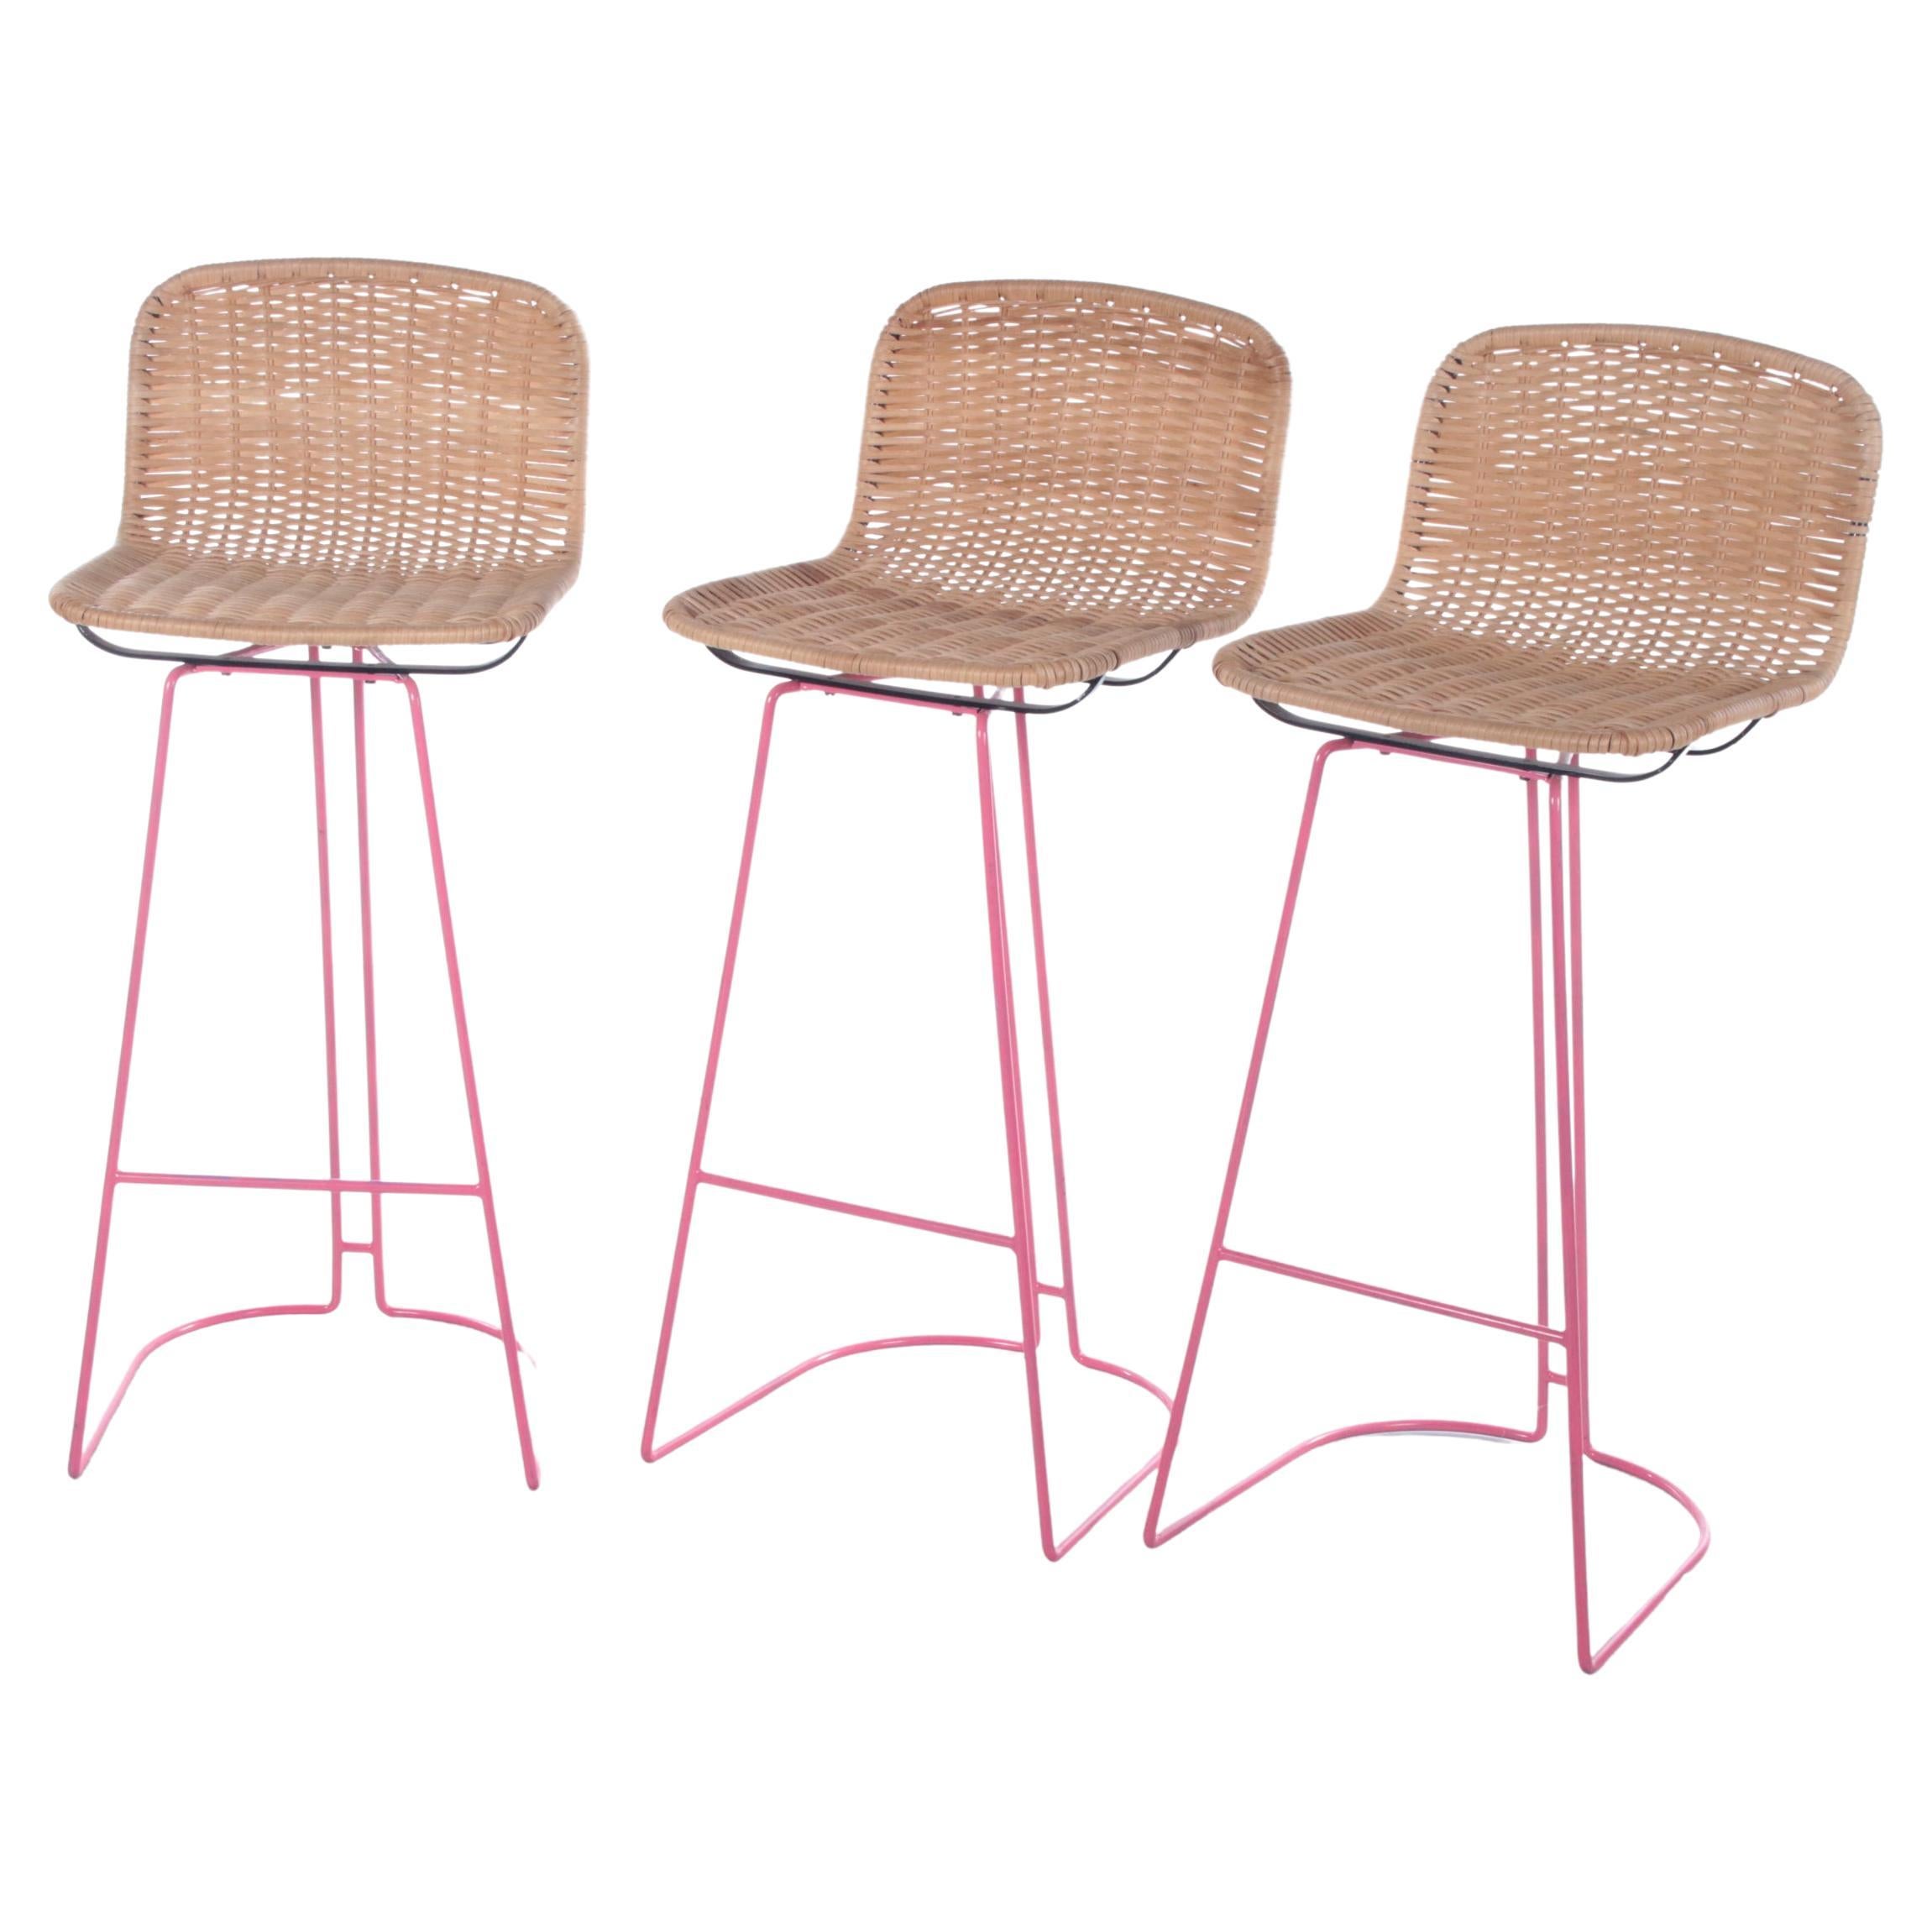 Italian Set of 3 Bar Stools with Cane and Metal by Cidue, 1980s For Sale